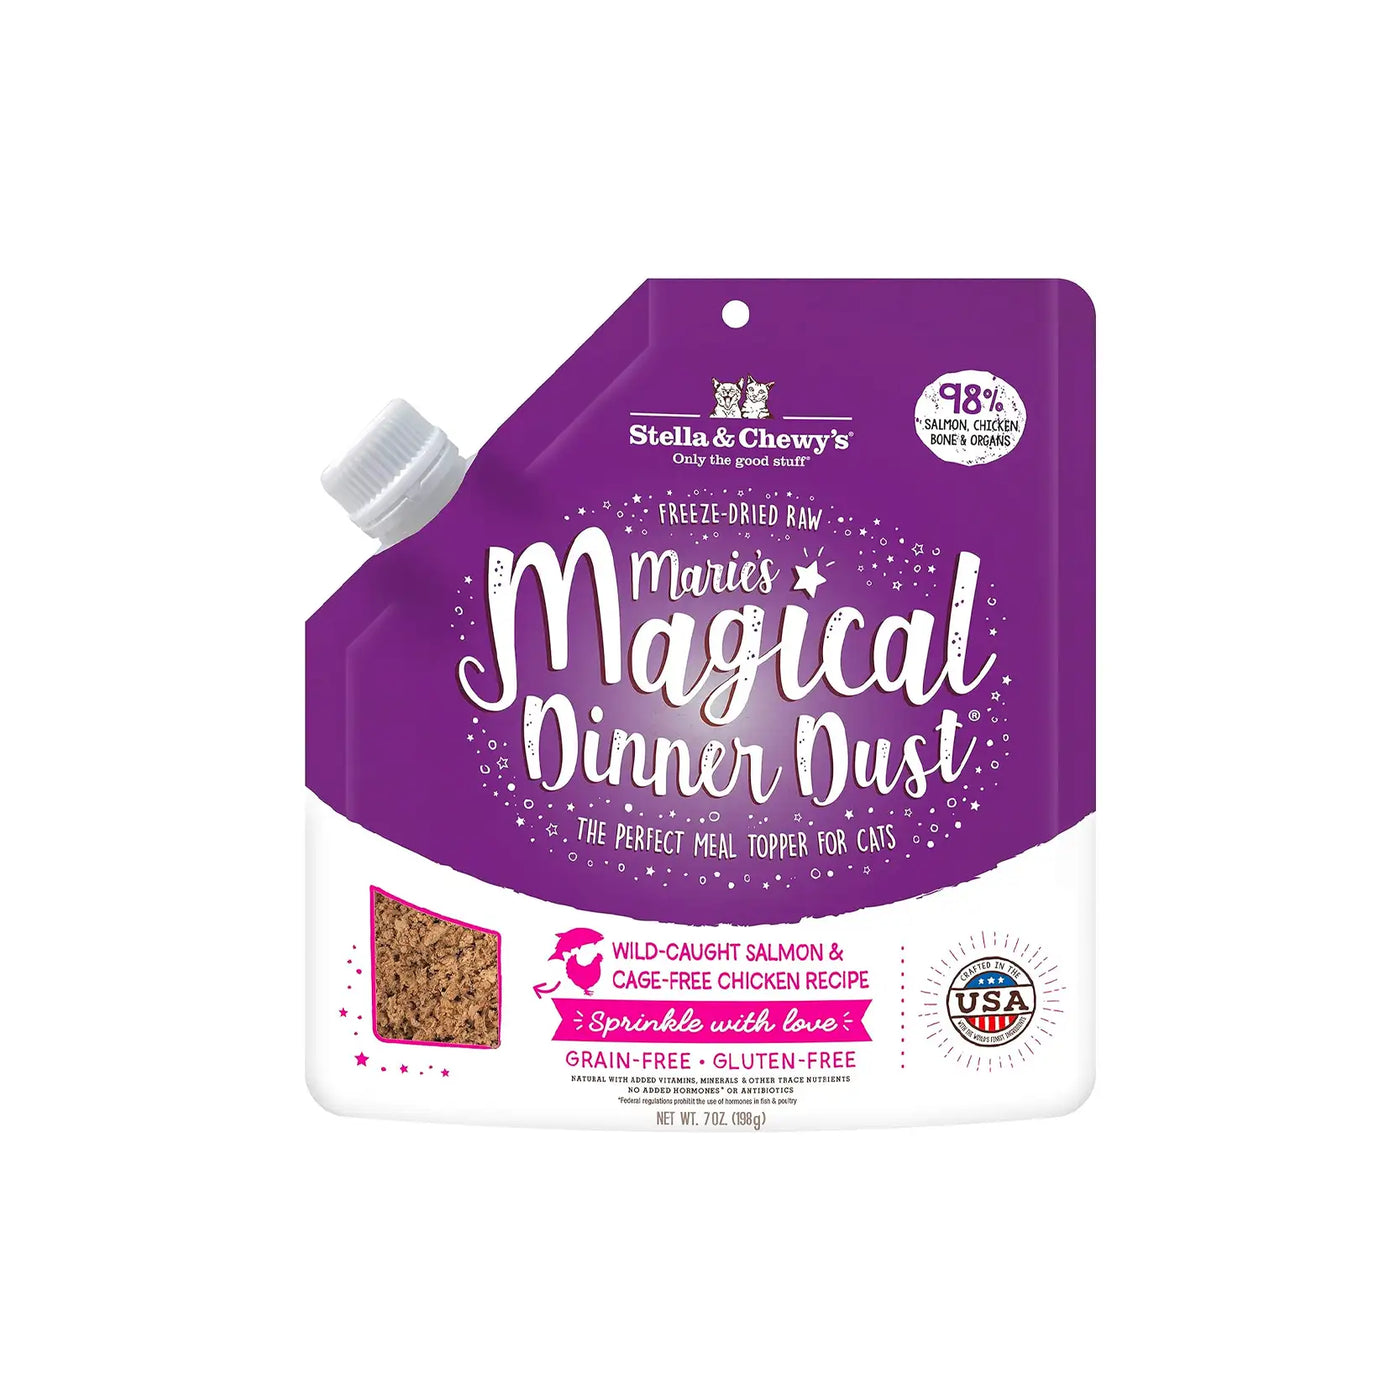 Stella & Chewy's - Marie's Magical Dinner Dust for Cats Wild-Caught Salmon & Cage-Free Chicken Recipe 7oz